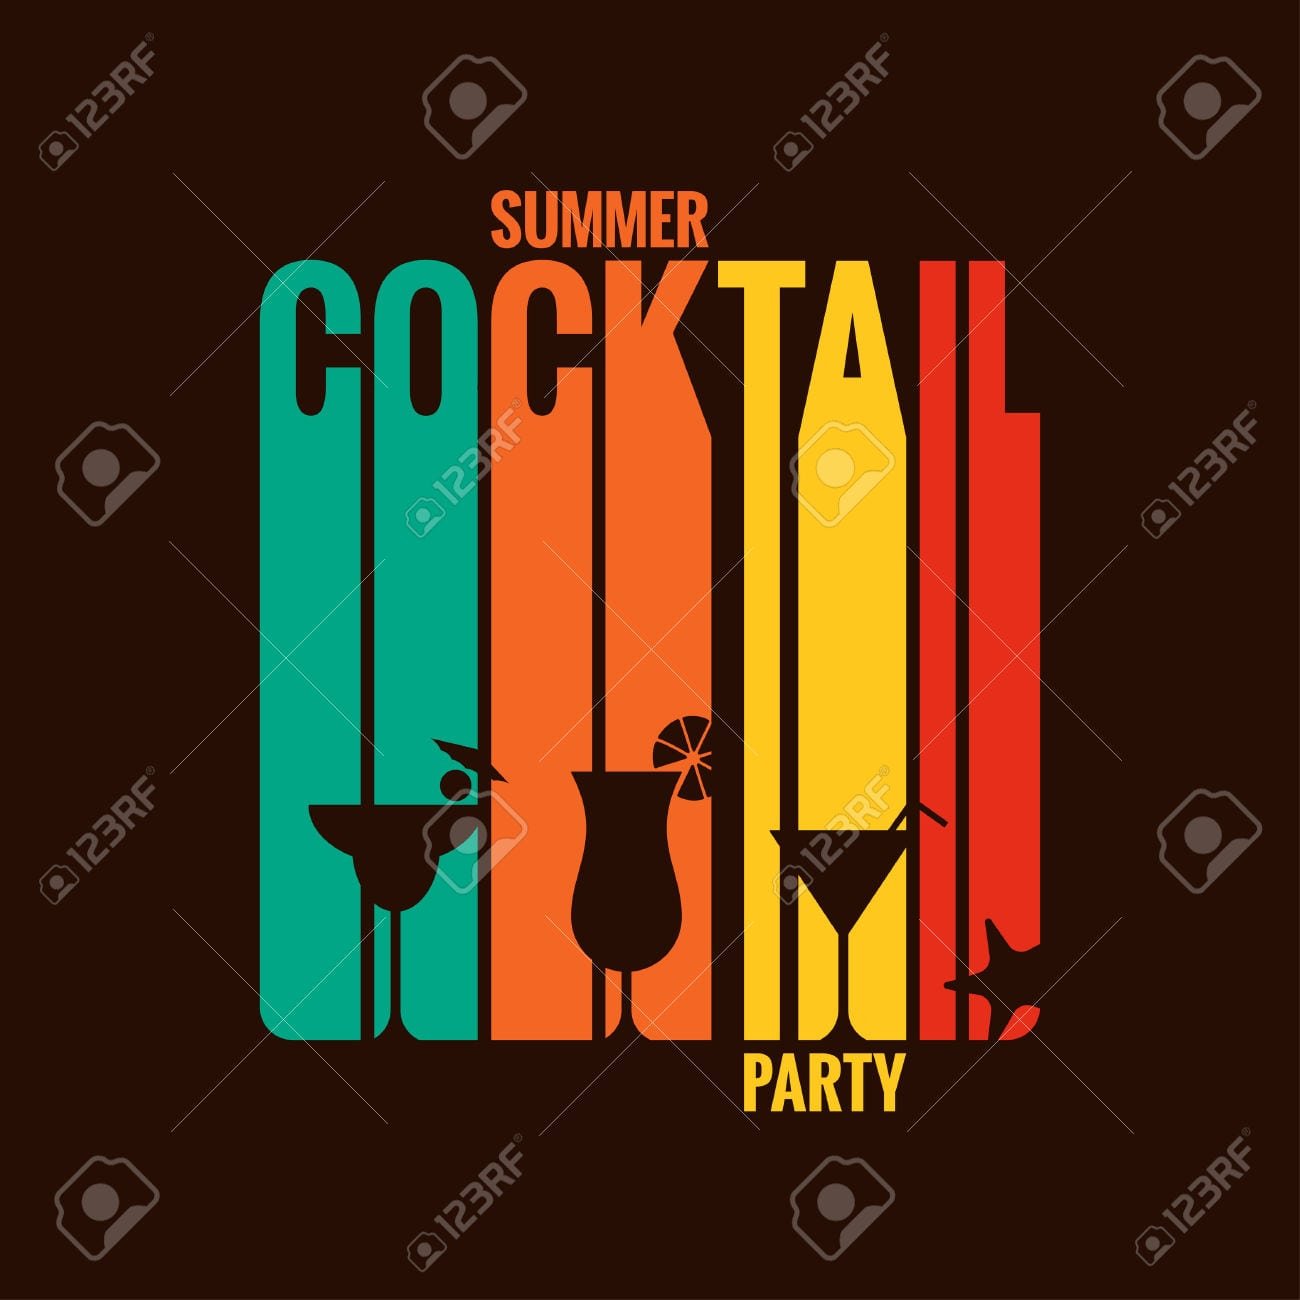 Summer Cocktail Party Menu Design Background Royalty Free Cliparts